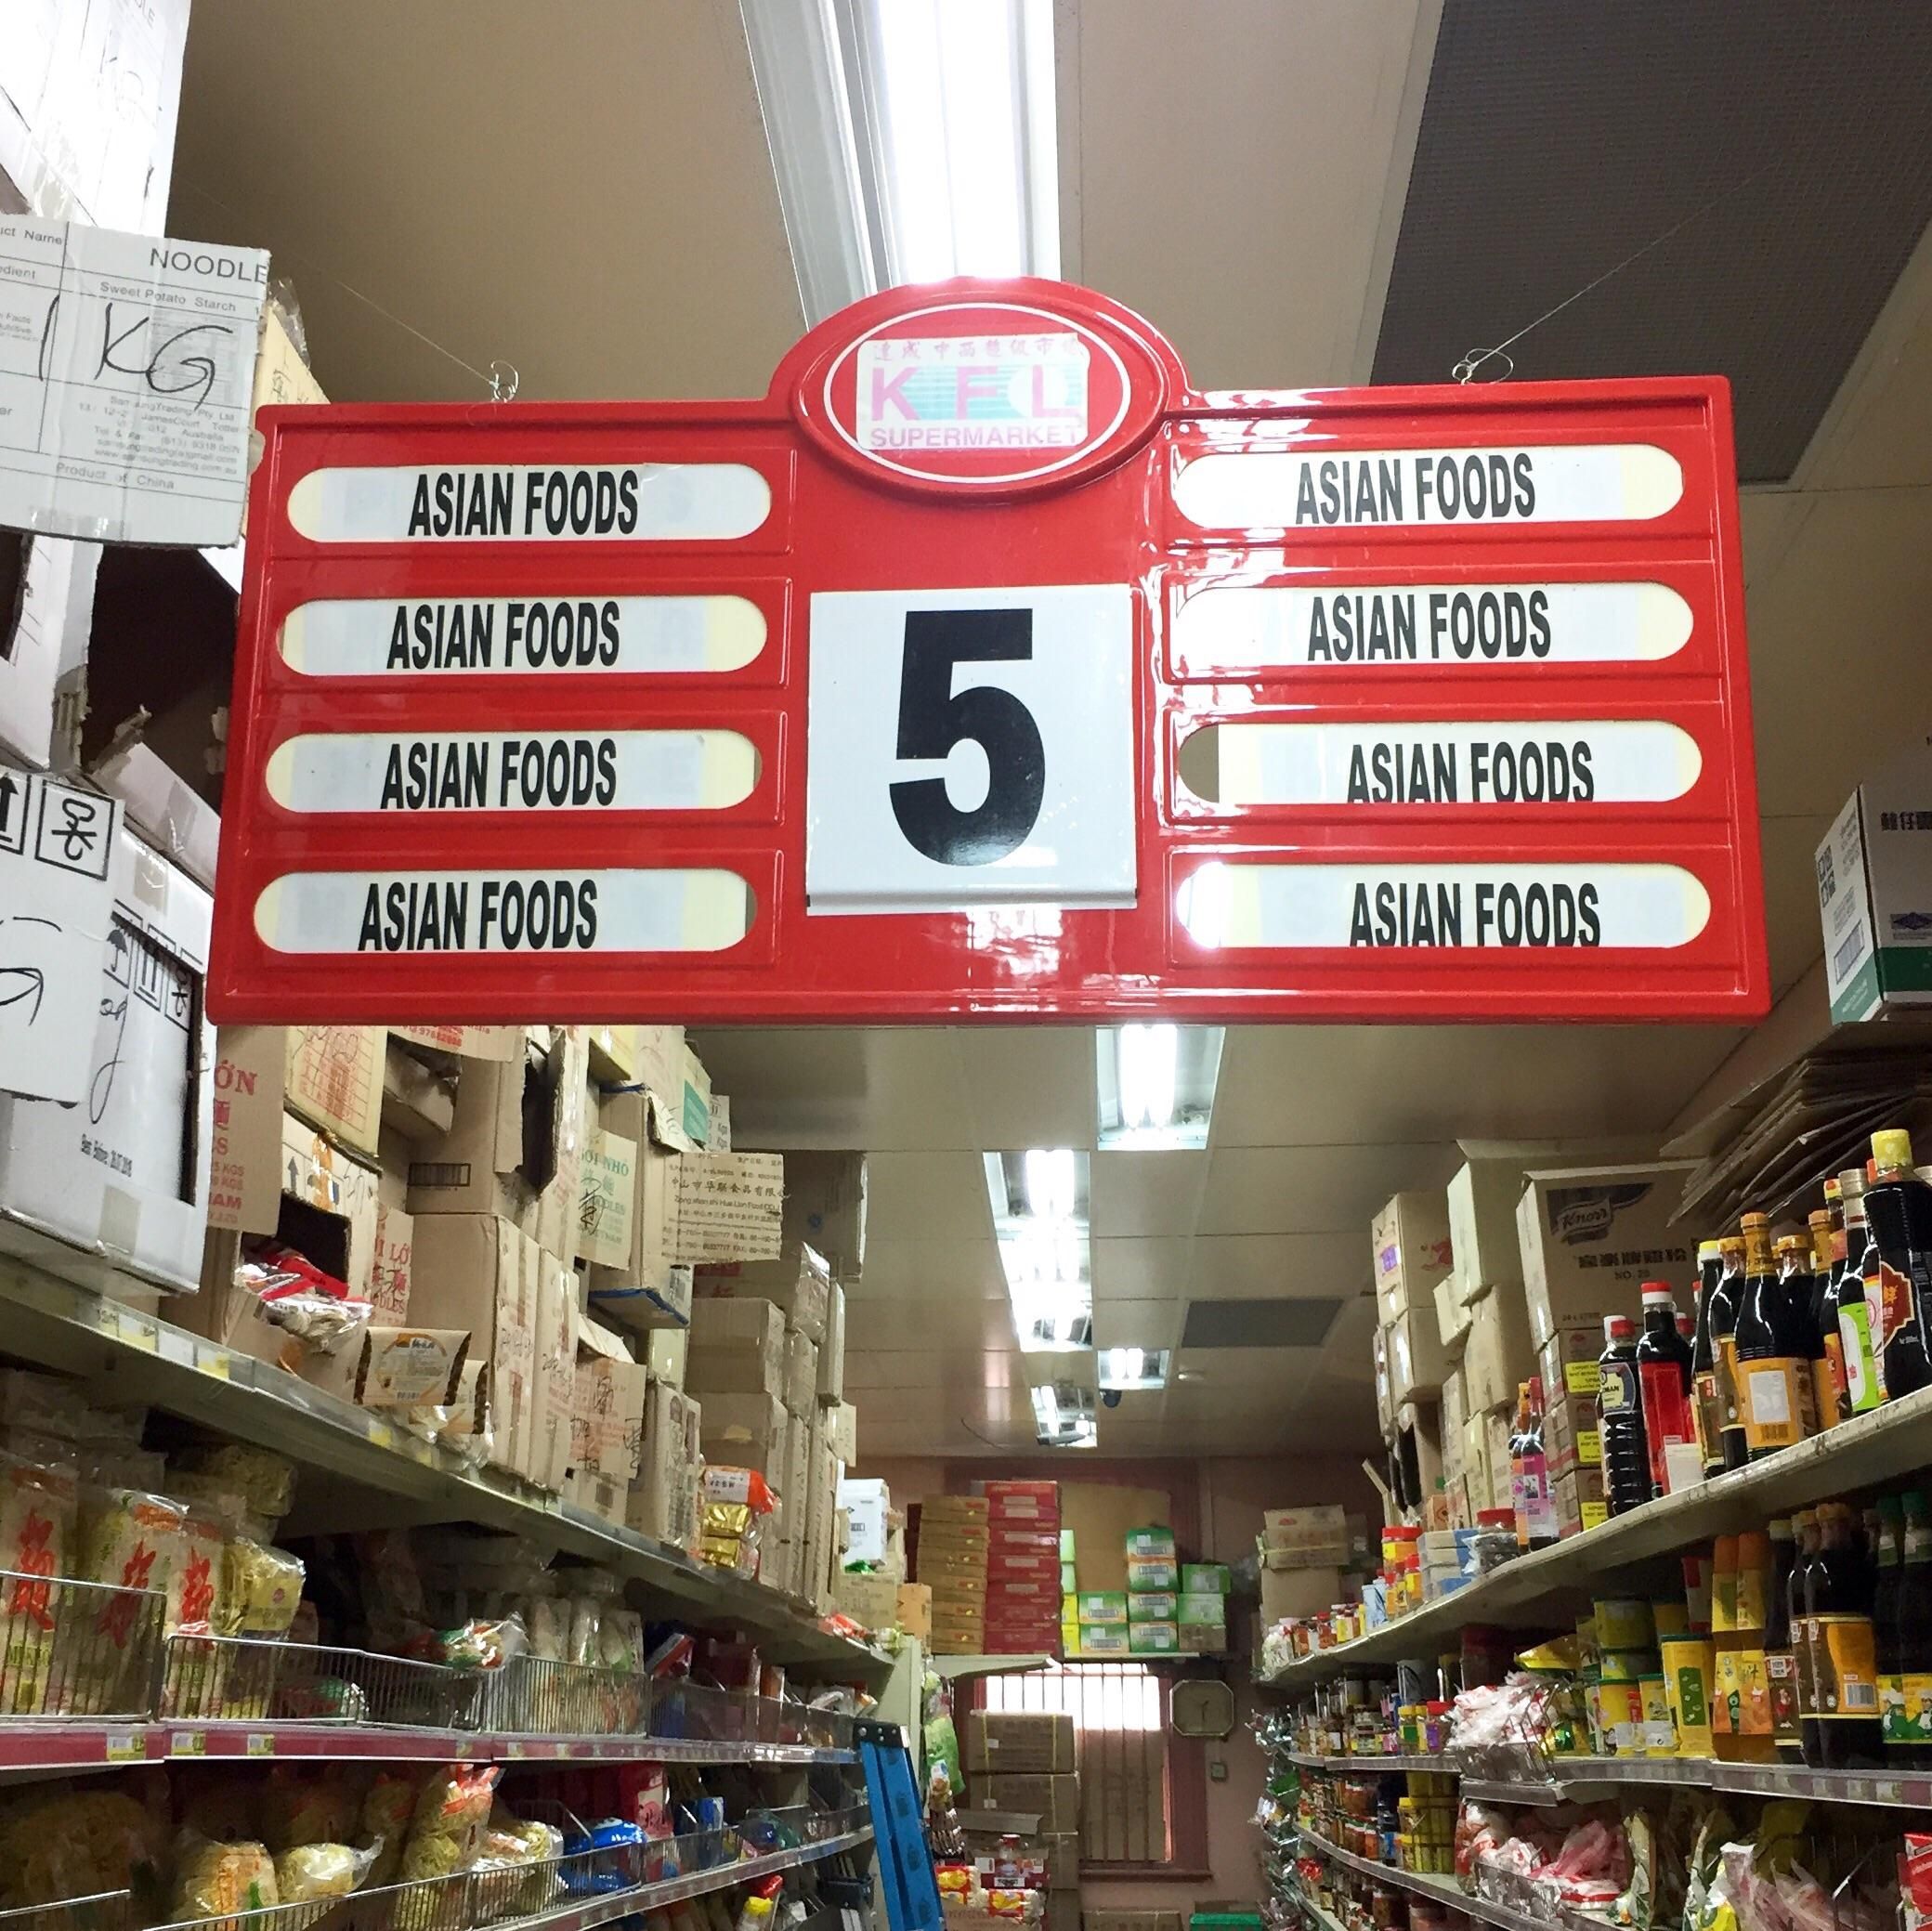 This sign in the Asian supermarket.